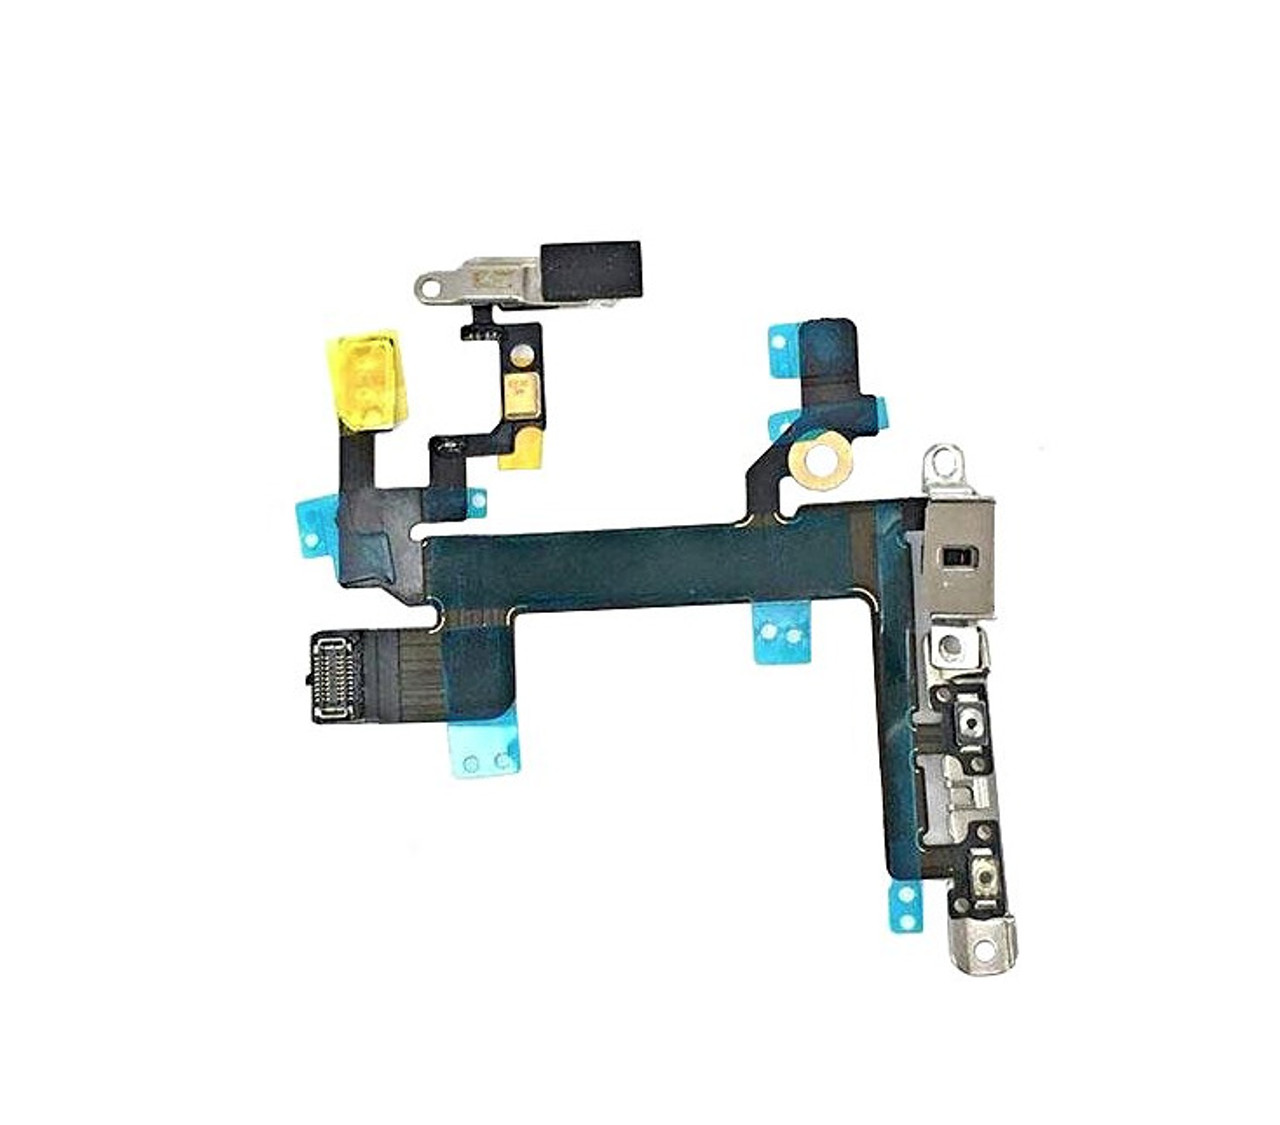 Power Mute Volume Button Switch Flex Ribbon Cable Metal Bracket For iPhone 5S